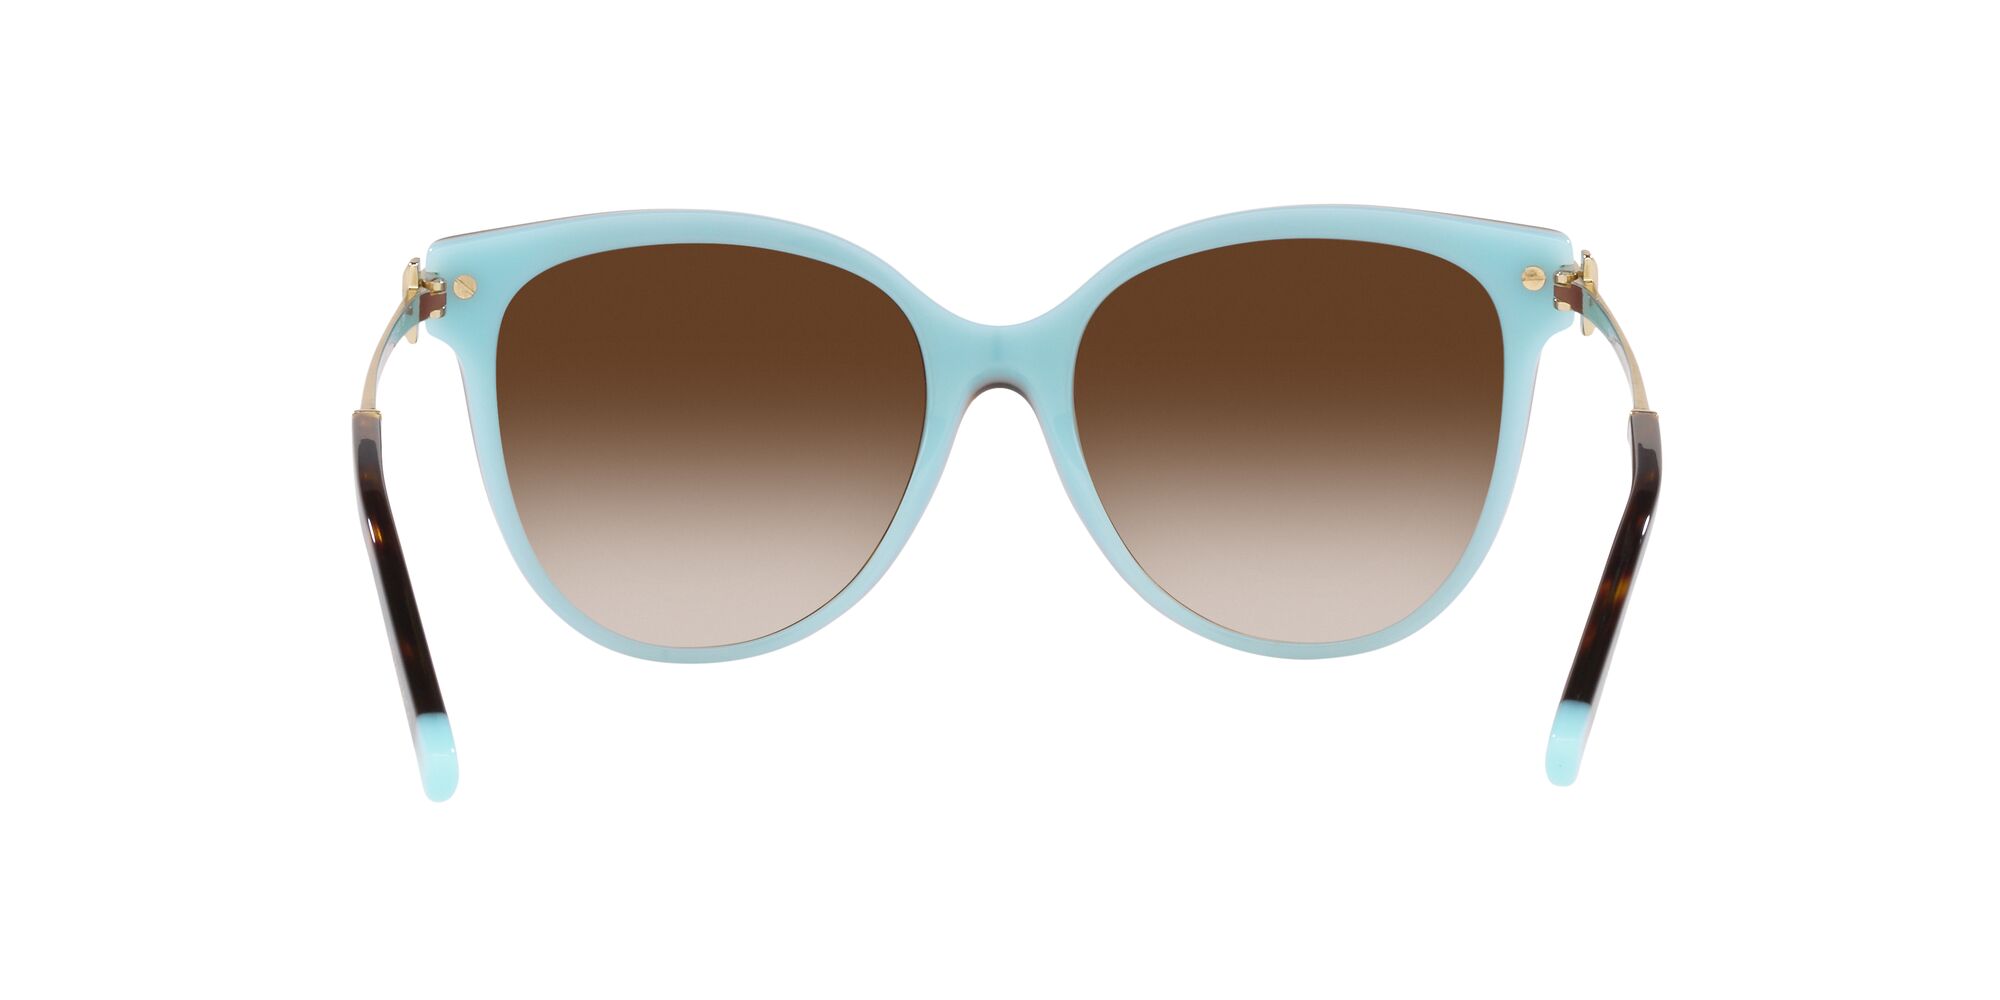 When one pair of sunglasses isn't enough ~ a summer diary - My Empirical  Life